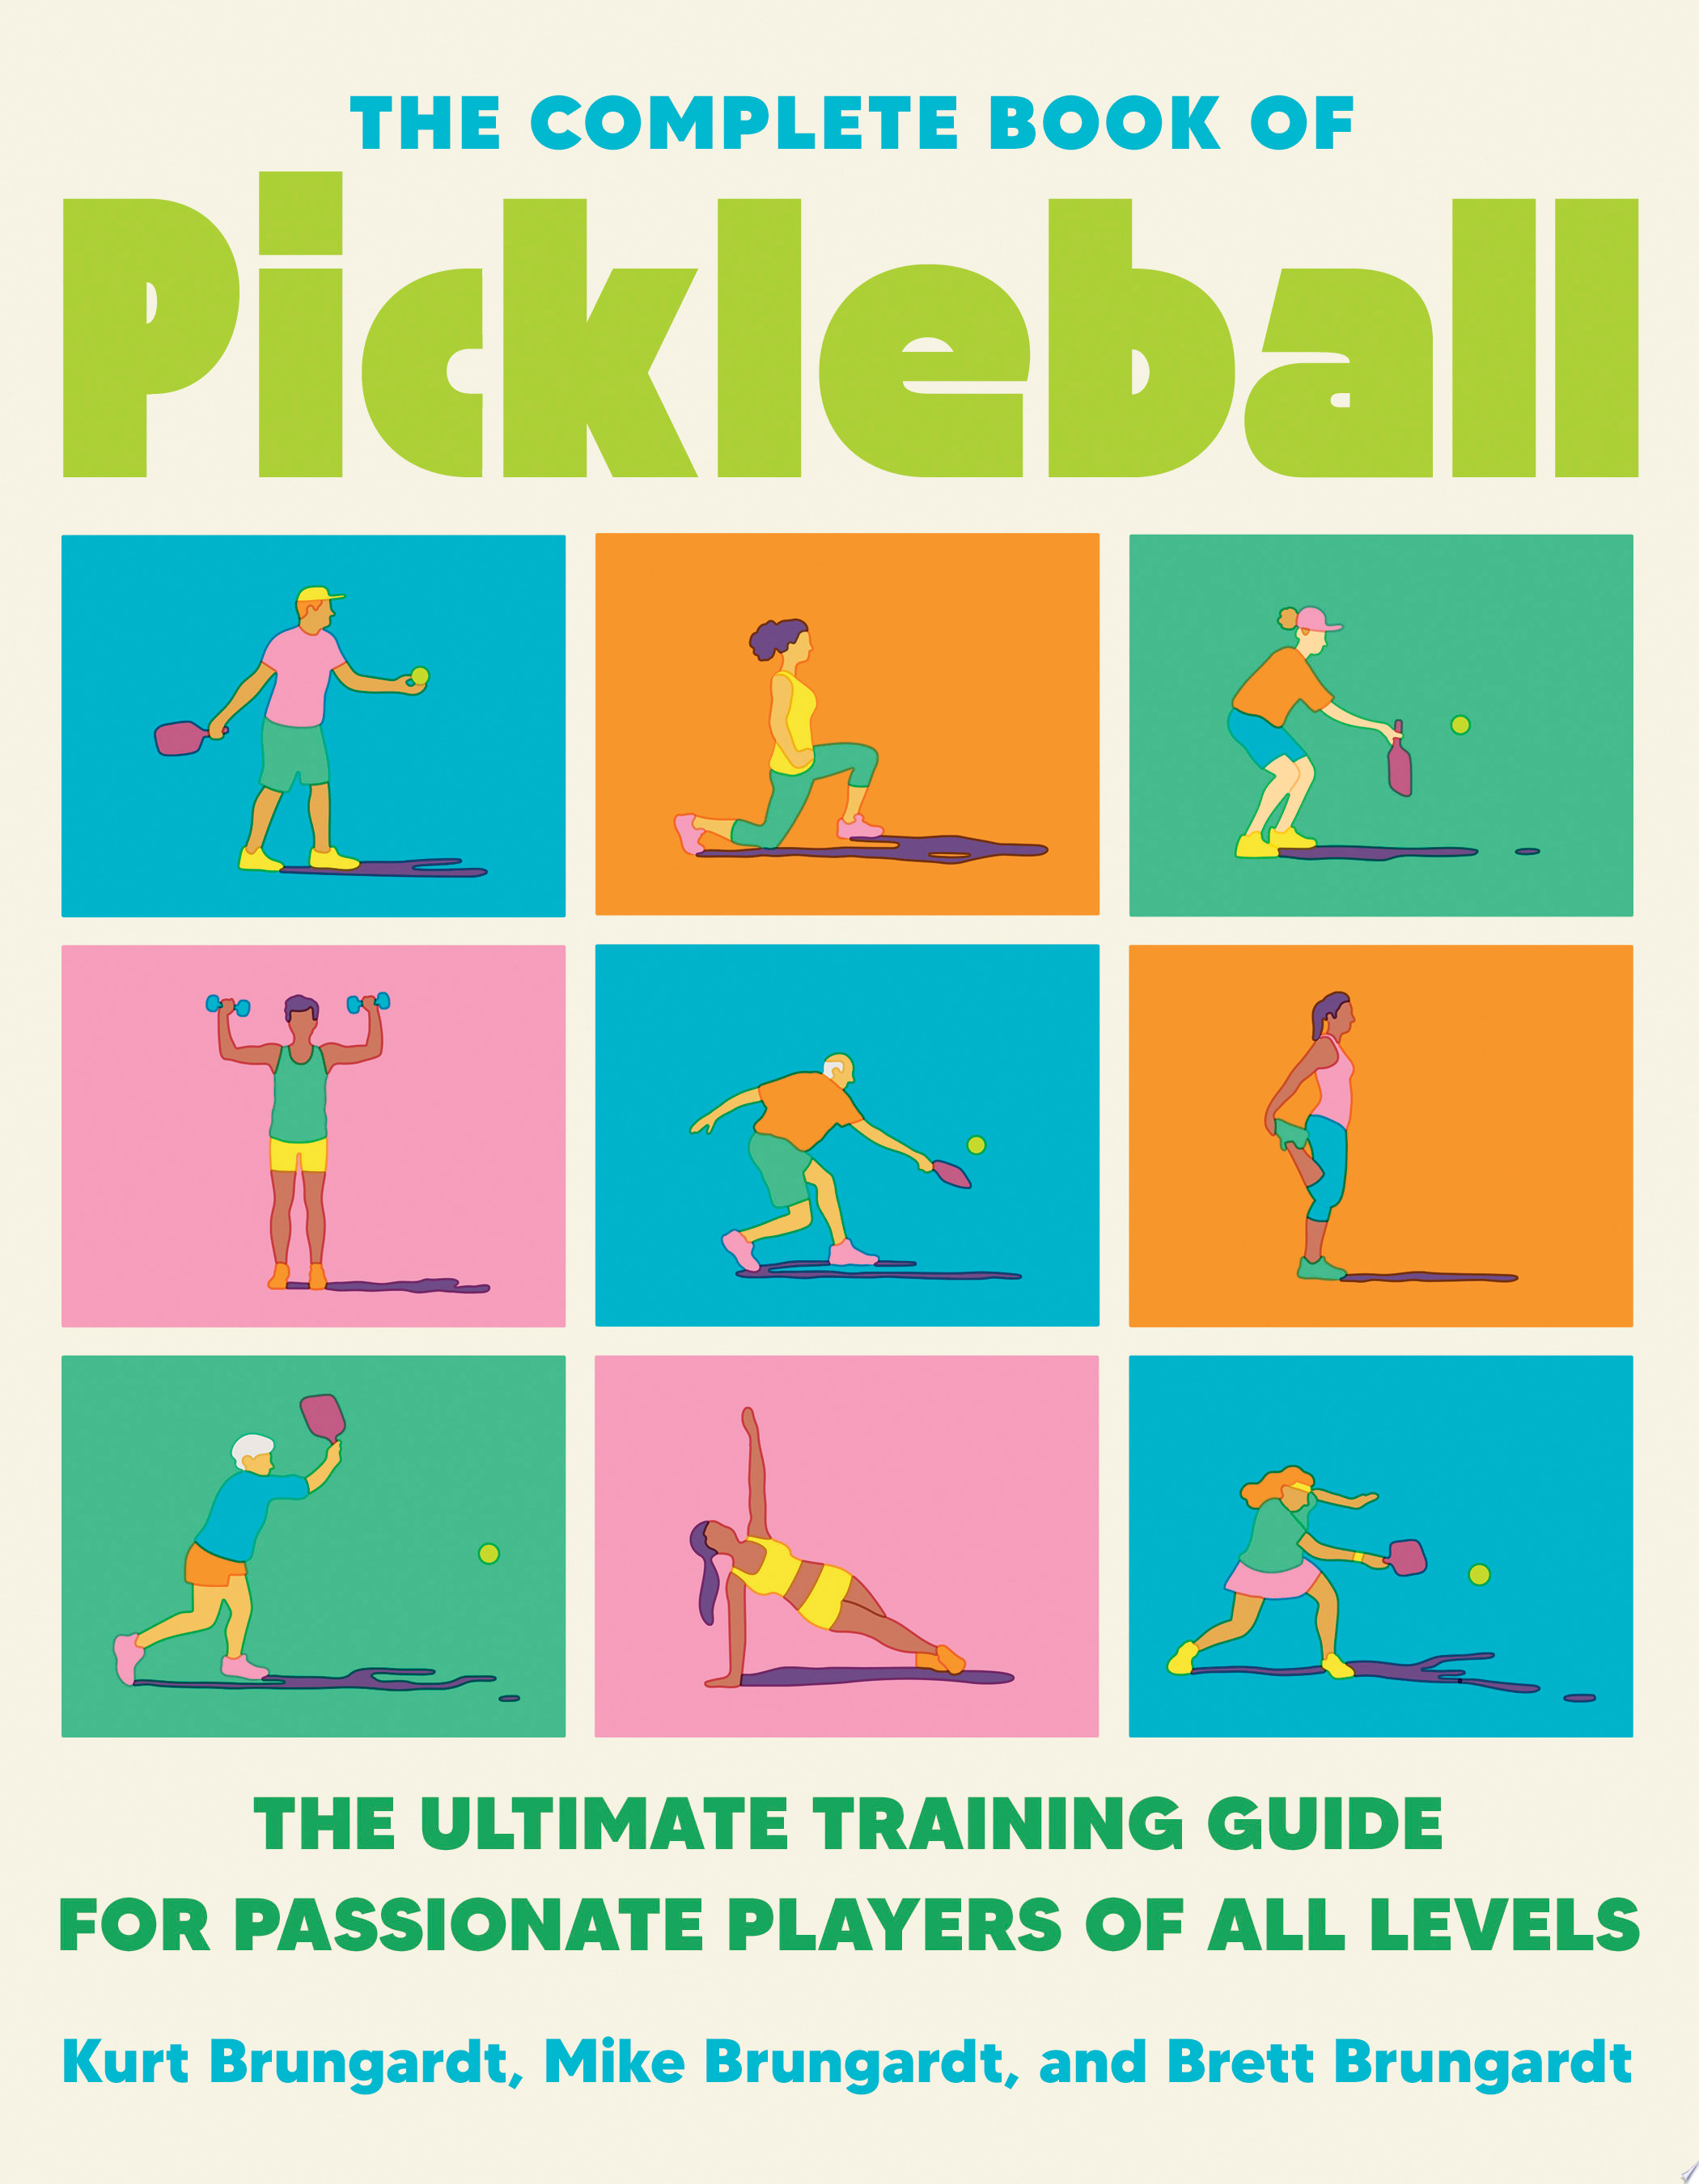 Image for "The Complete Book of Pickleball"